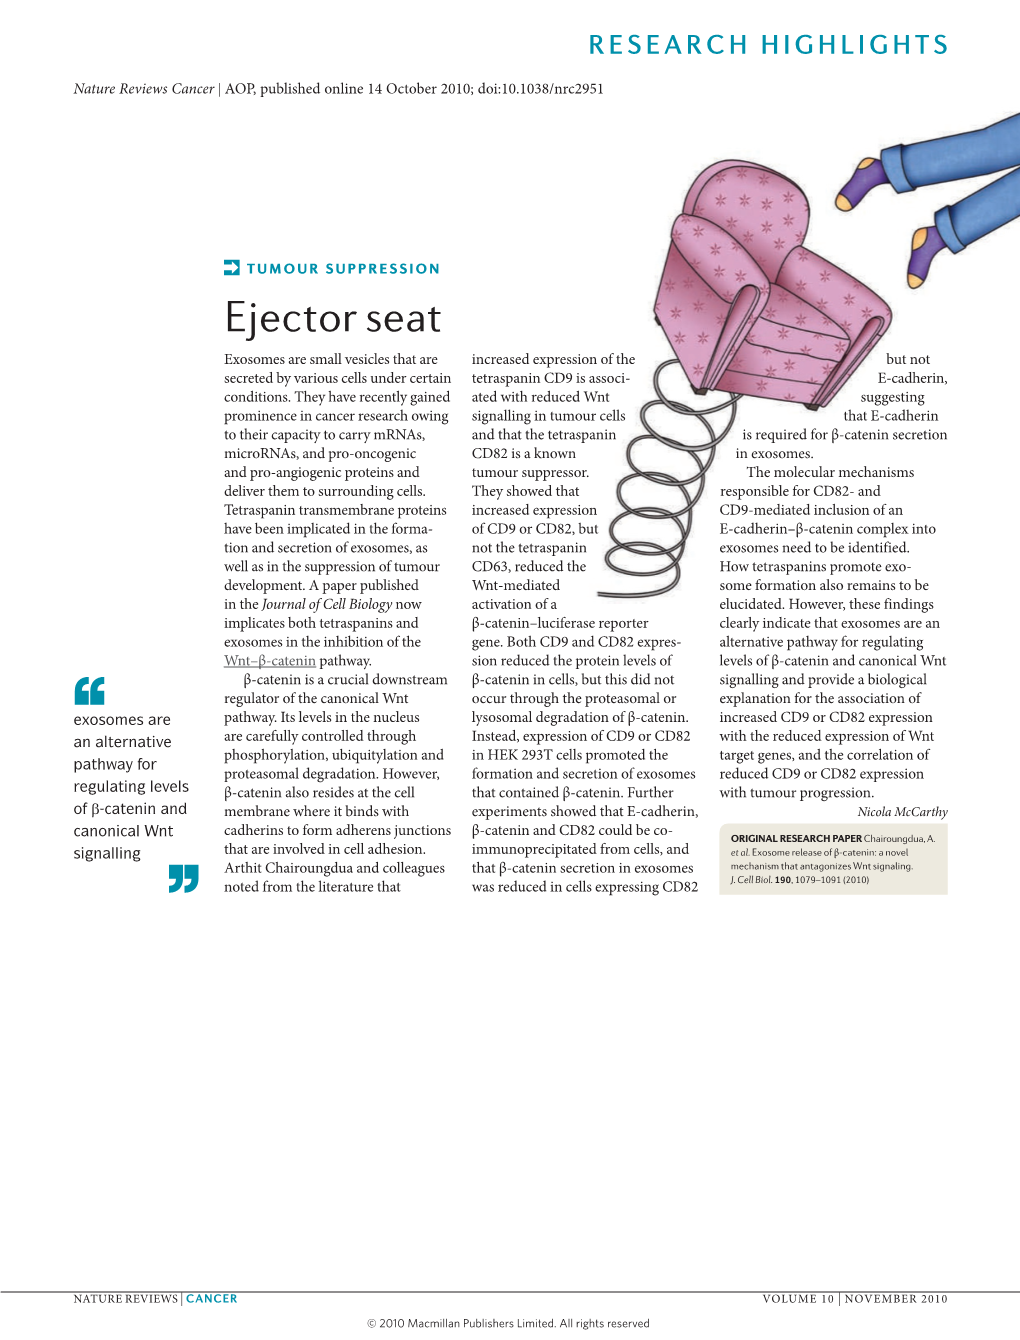 Tumour Suppression: Ejector Seat